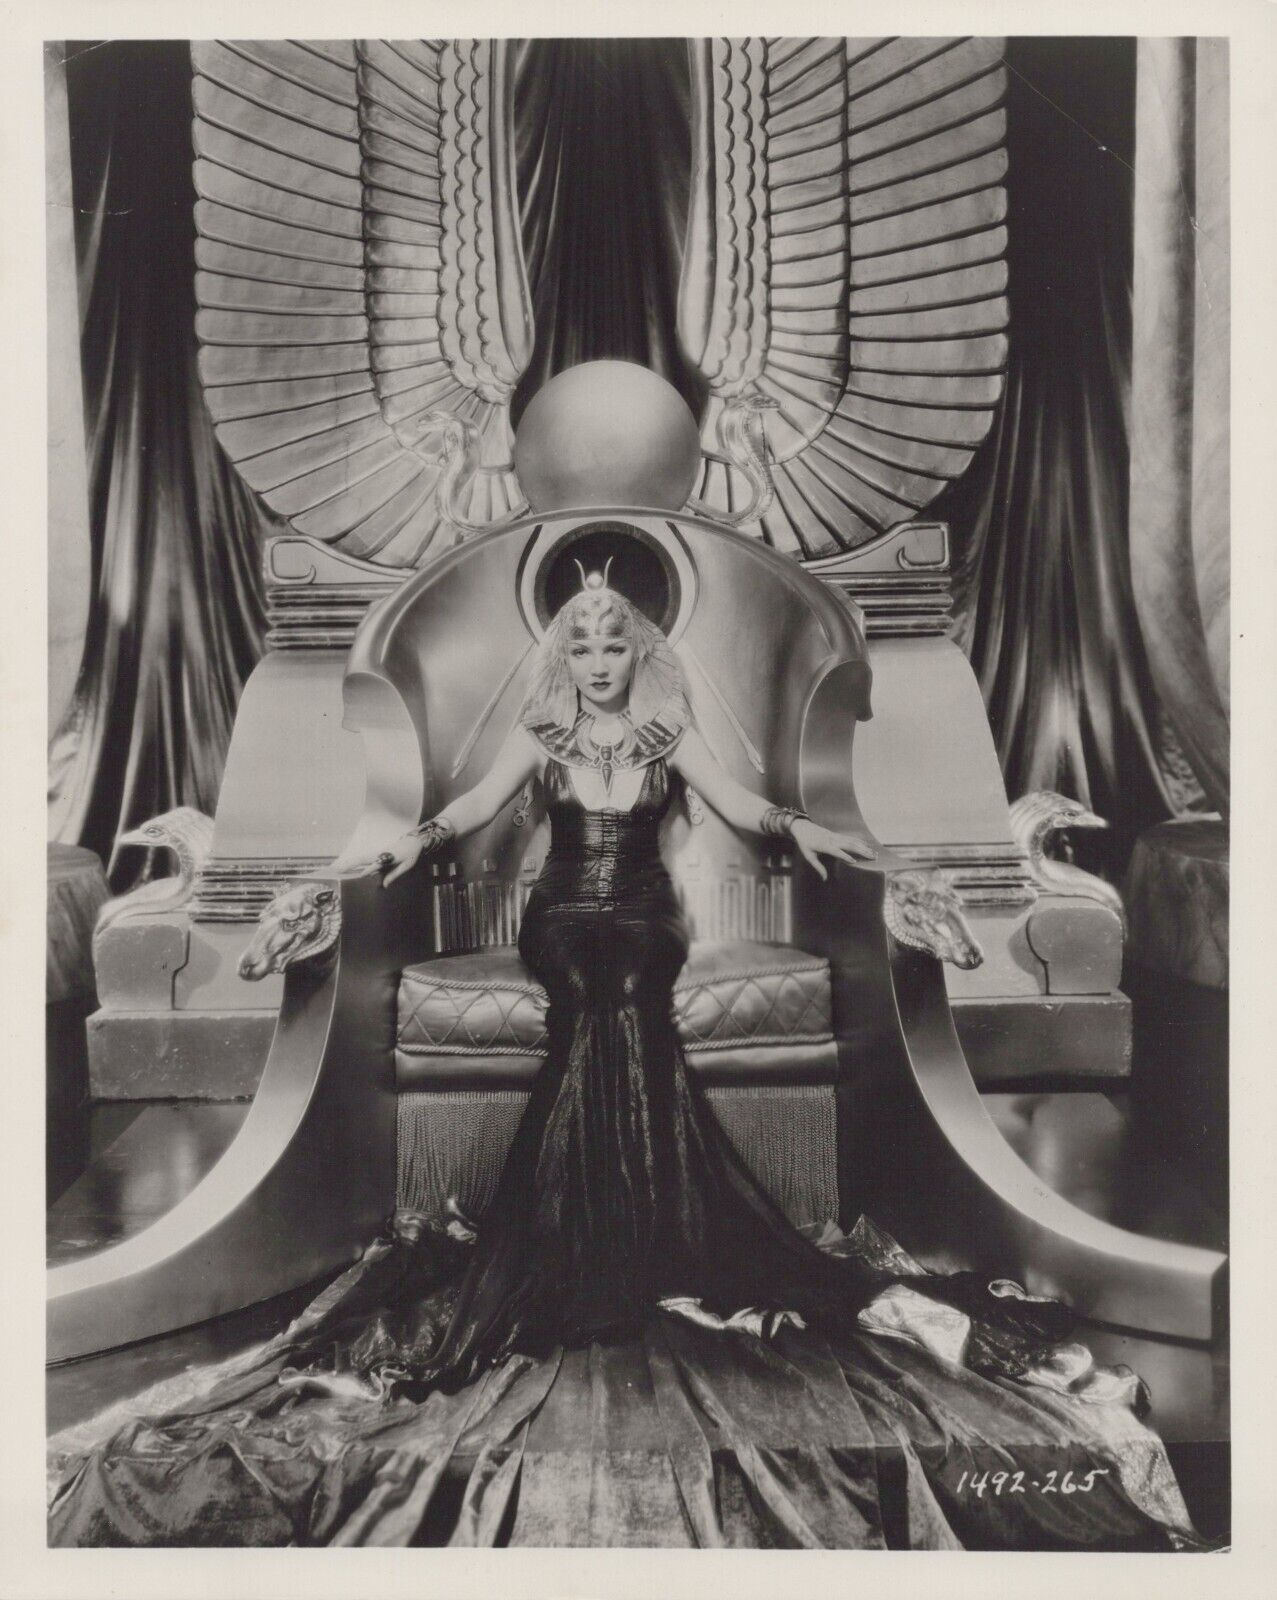 HOLLYWOOD BEAUTY CLAUDETTE COLBERT in CLEOPATRA PORTRAIT 1950s VINTAGE Photo C41